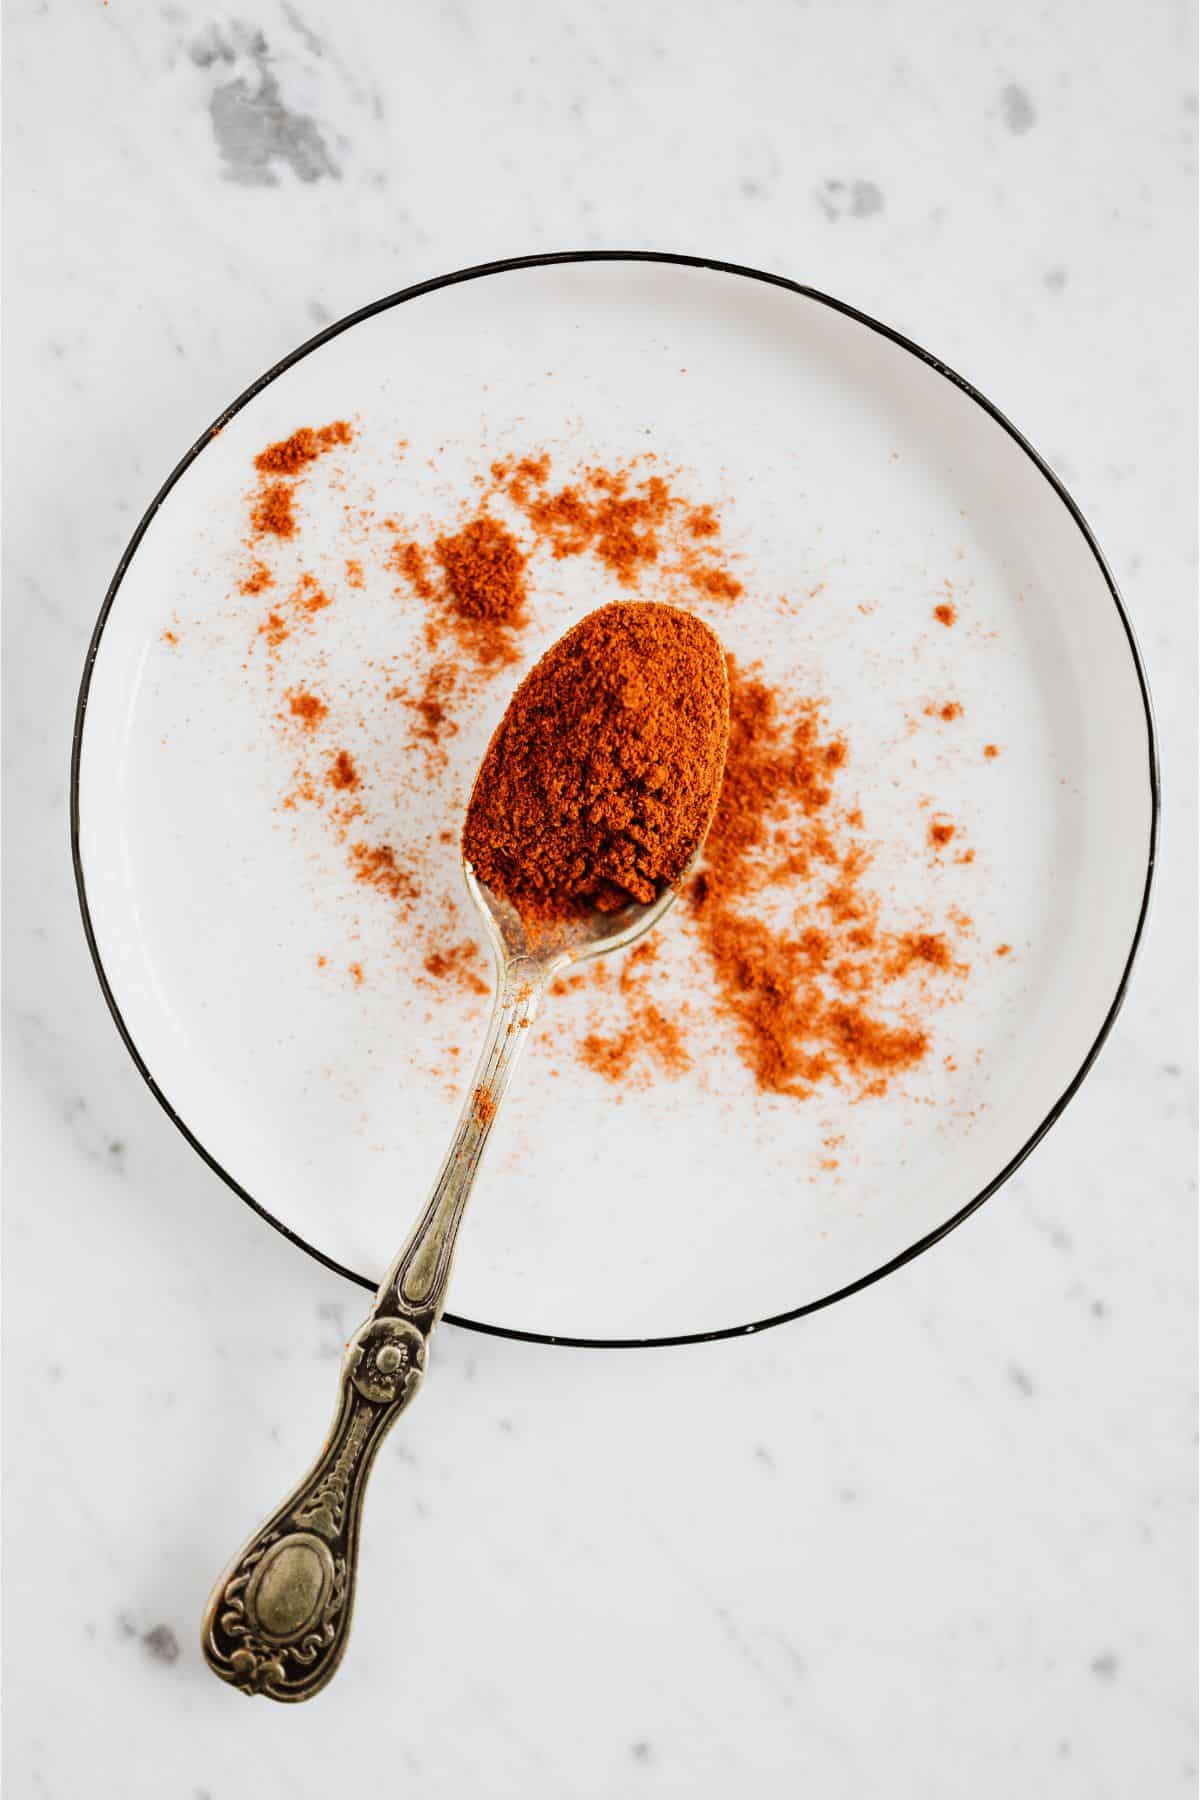 Silver spoon spreading paprika spice on white plate.